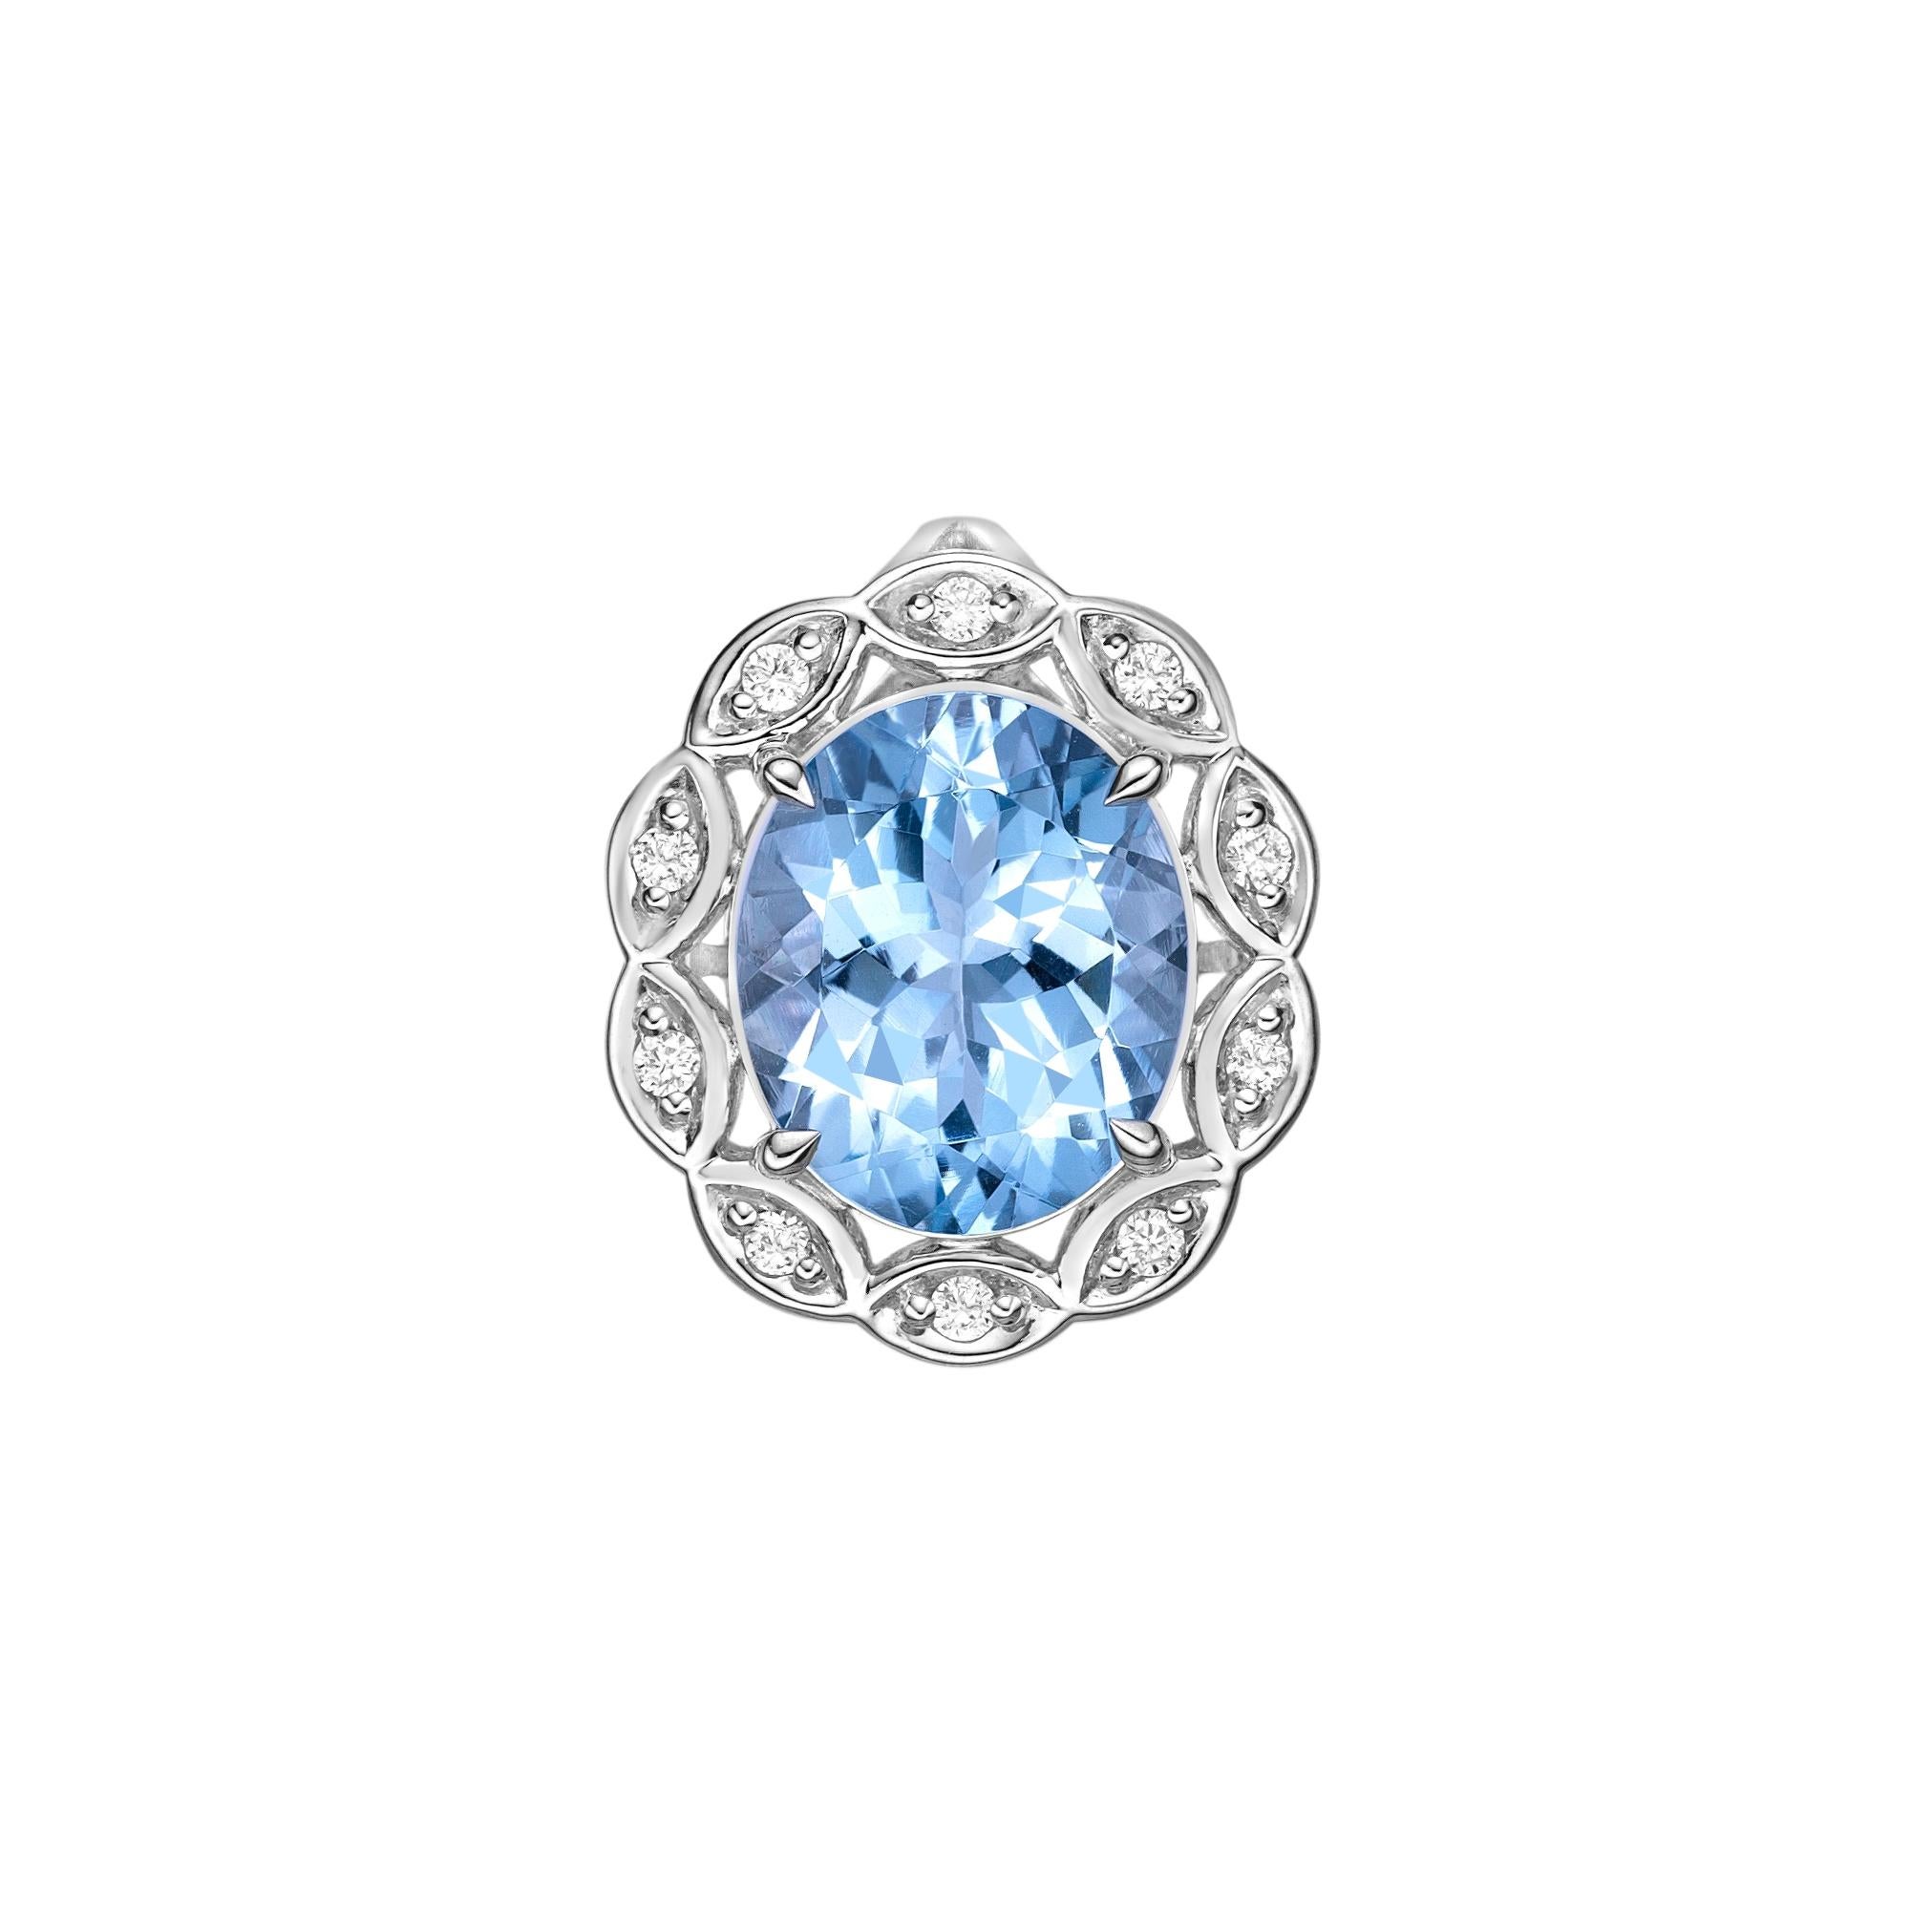 Contemporary 3.80 Carat Aquamarine Ring in 18Karat White Gold with White Diamond. For Sale